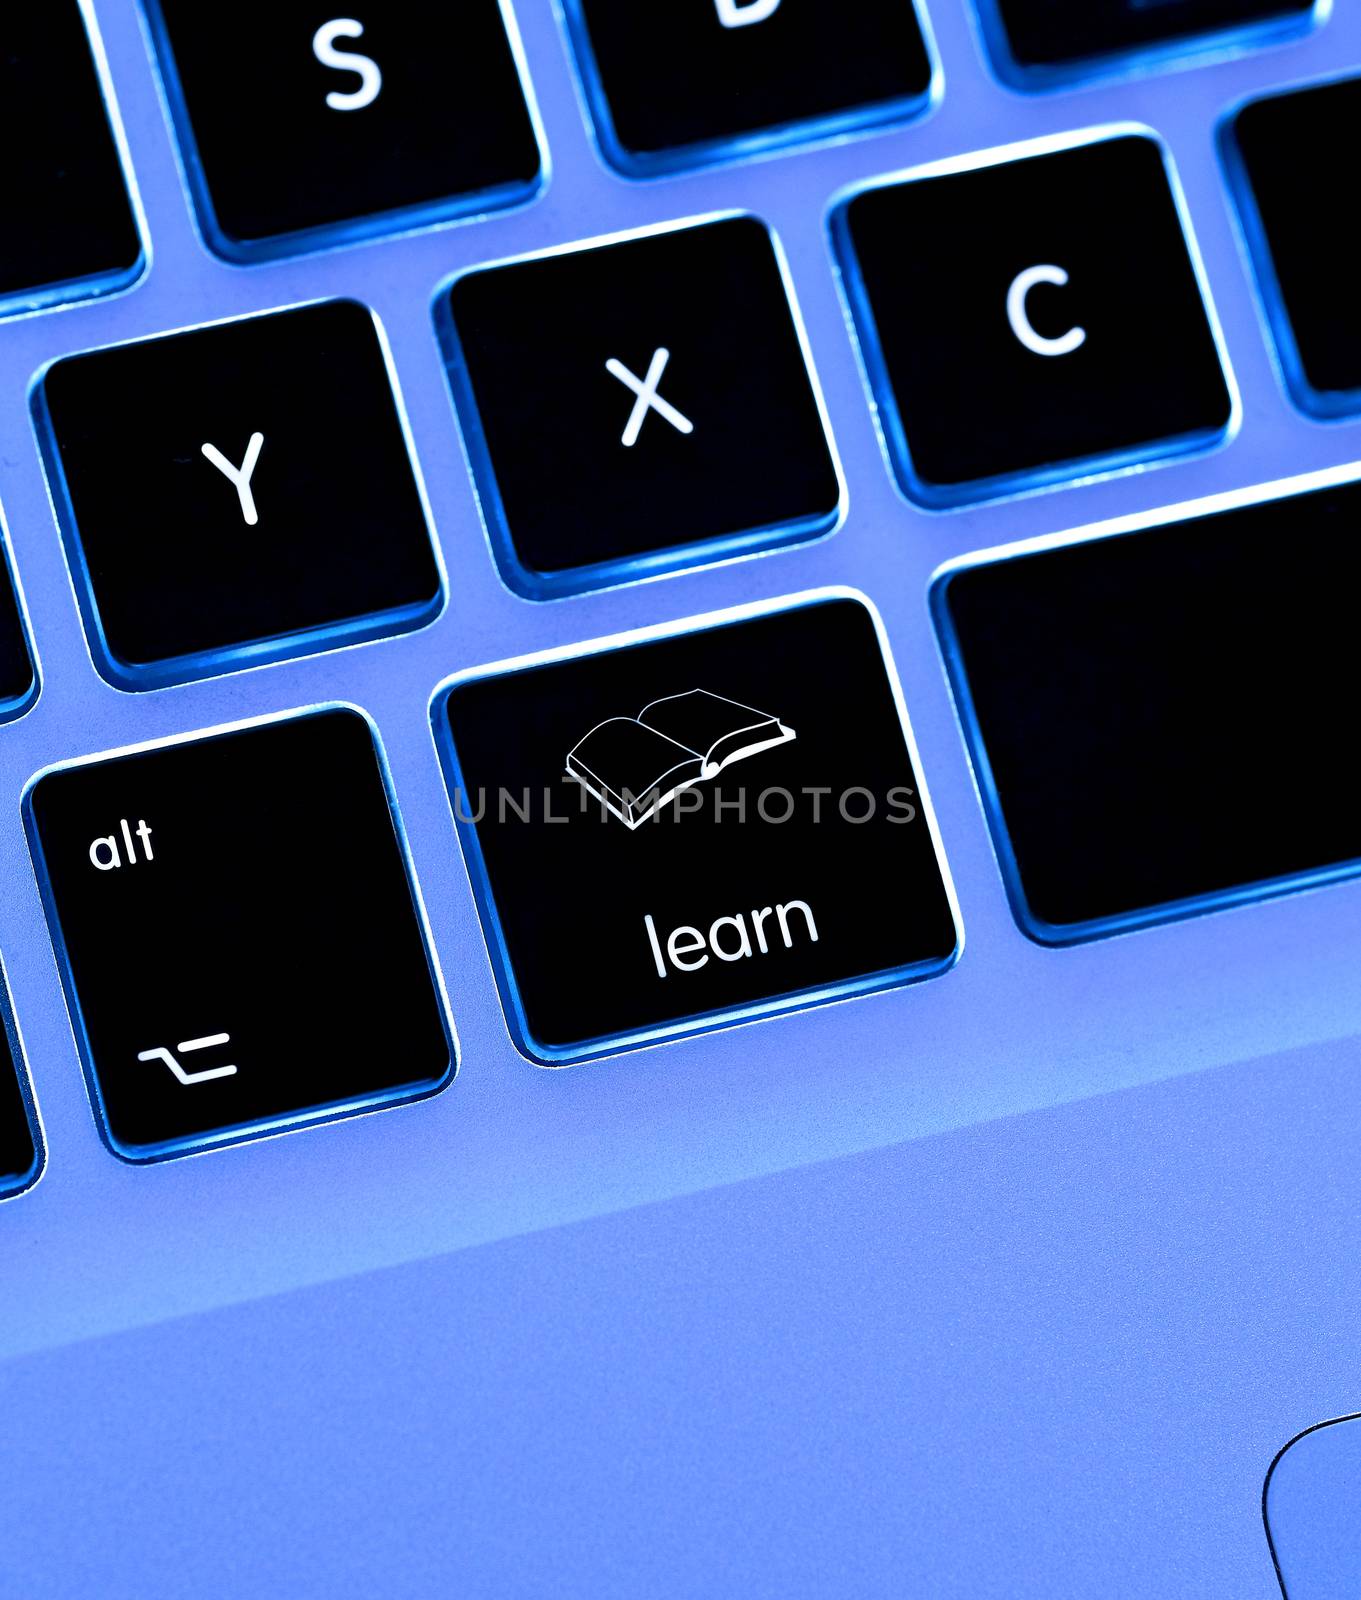 keyboard layout with "learn" key / button {super high resolution/shot with PhaseOne P45}